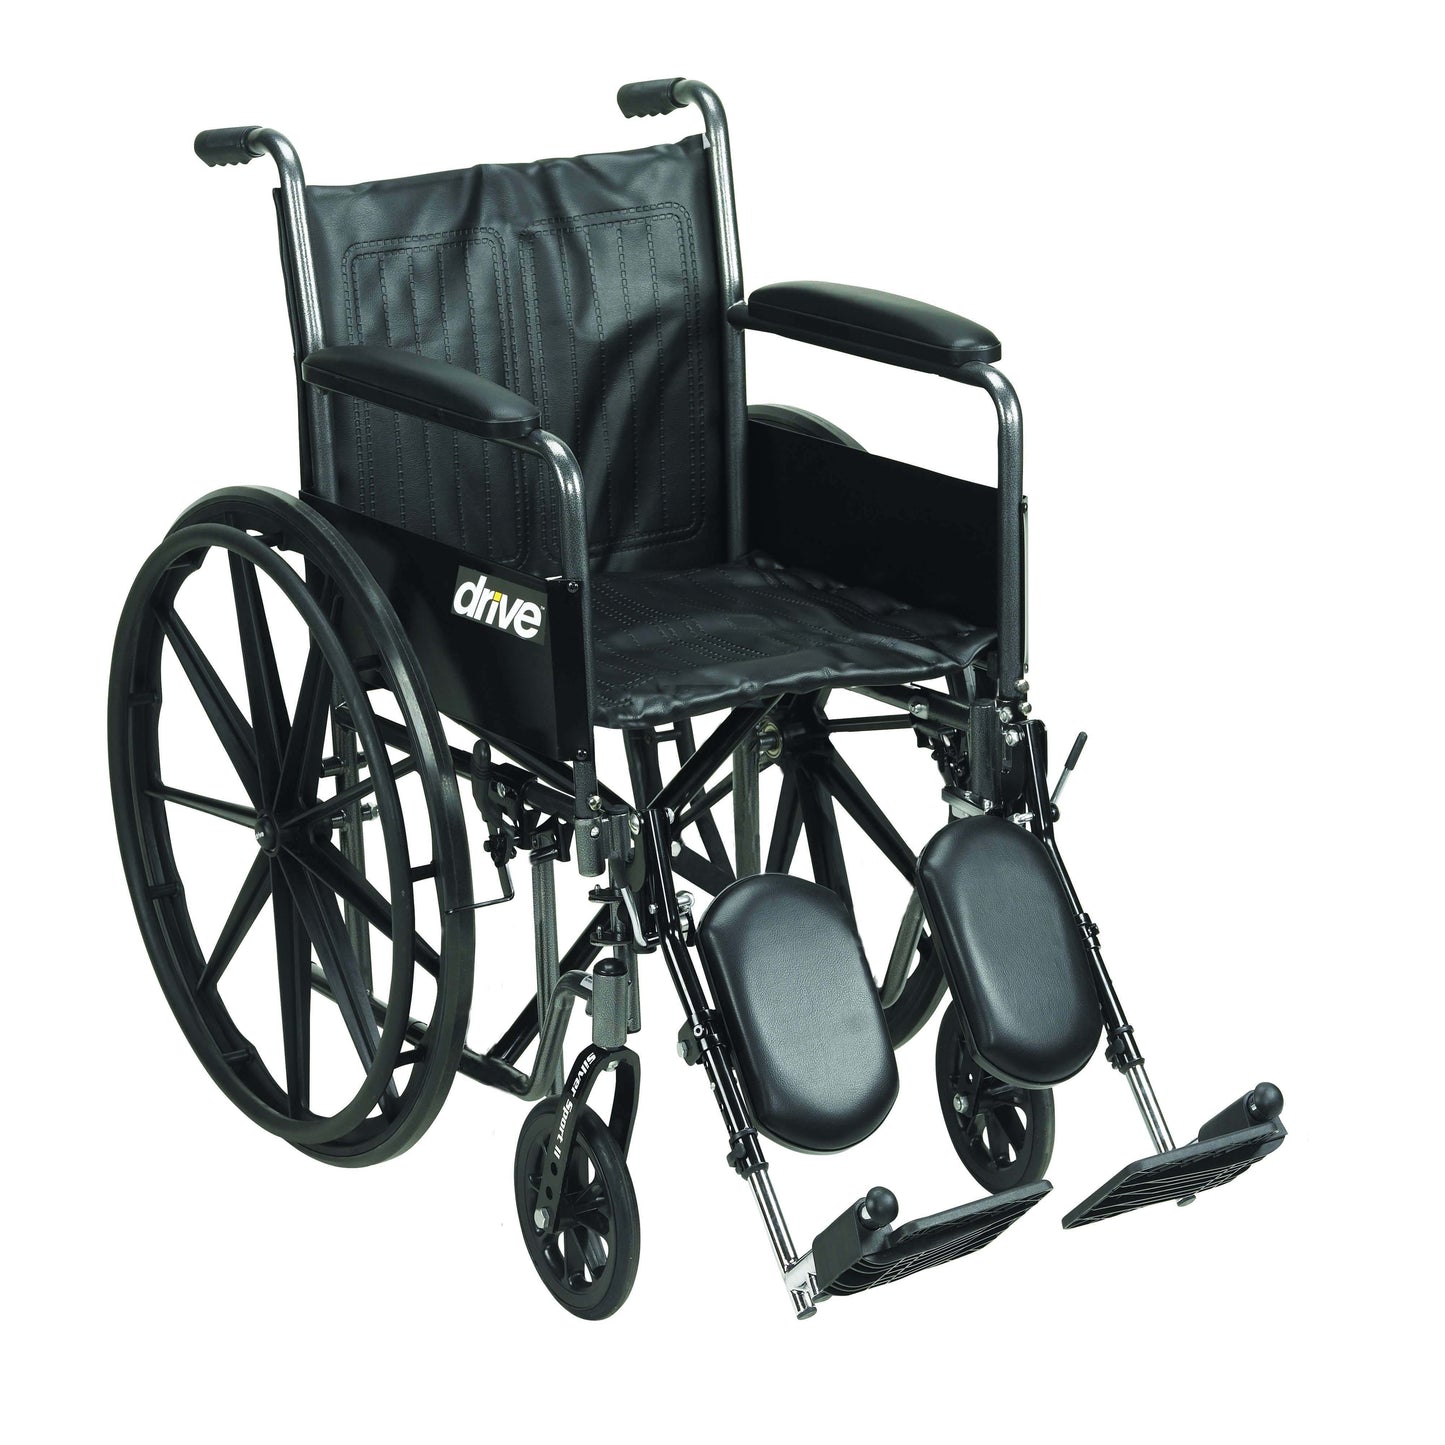 Drive ssp220dfa-elr Silver Sport 2 Wheelchair, Detachable Full Arms, Elevating Leg Rests, 20" Seat